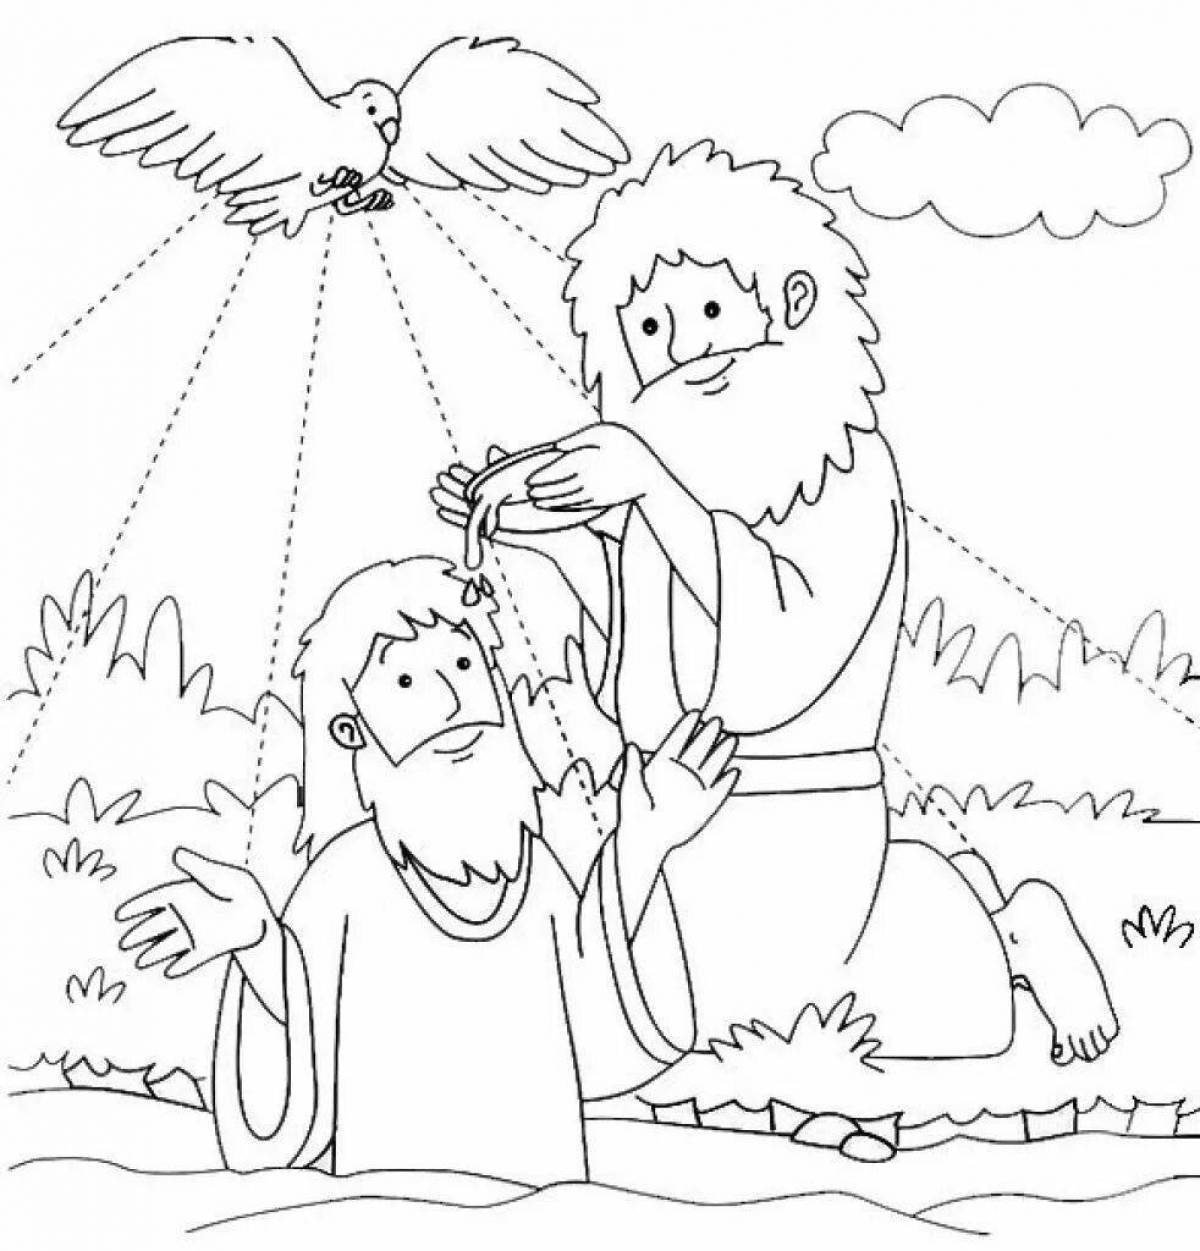 Christening holiday coloring page